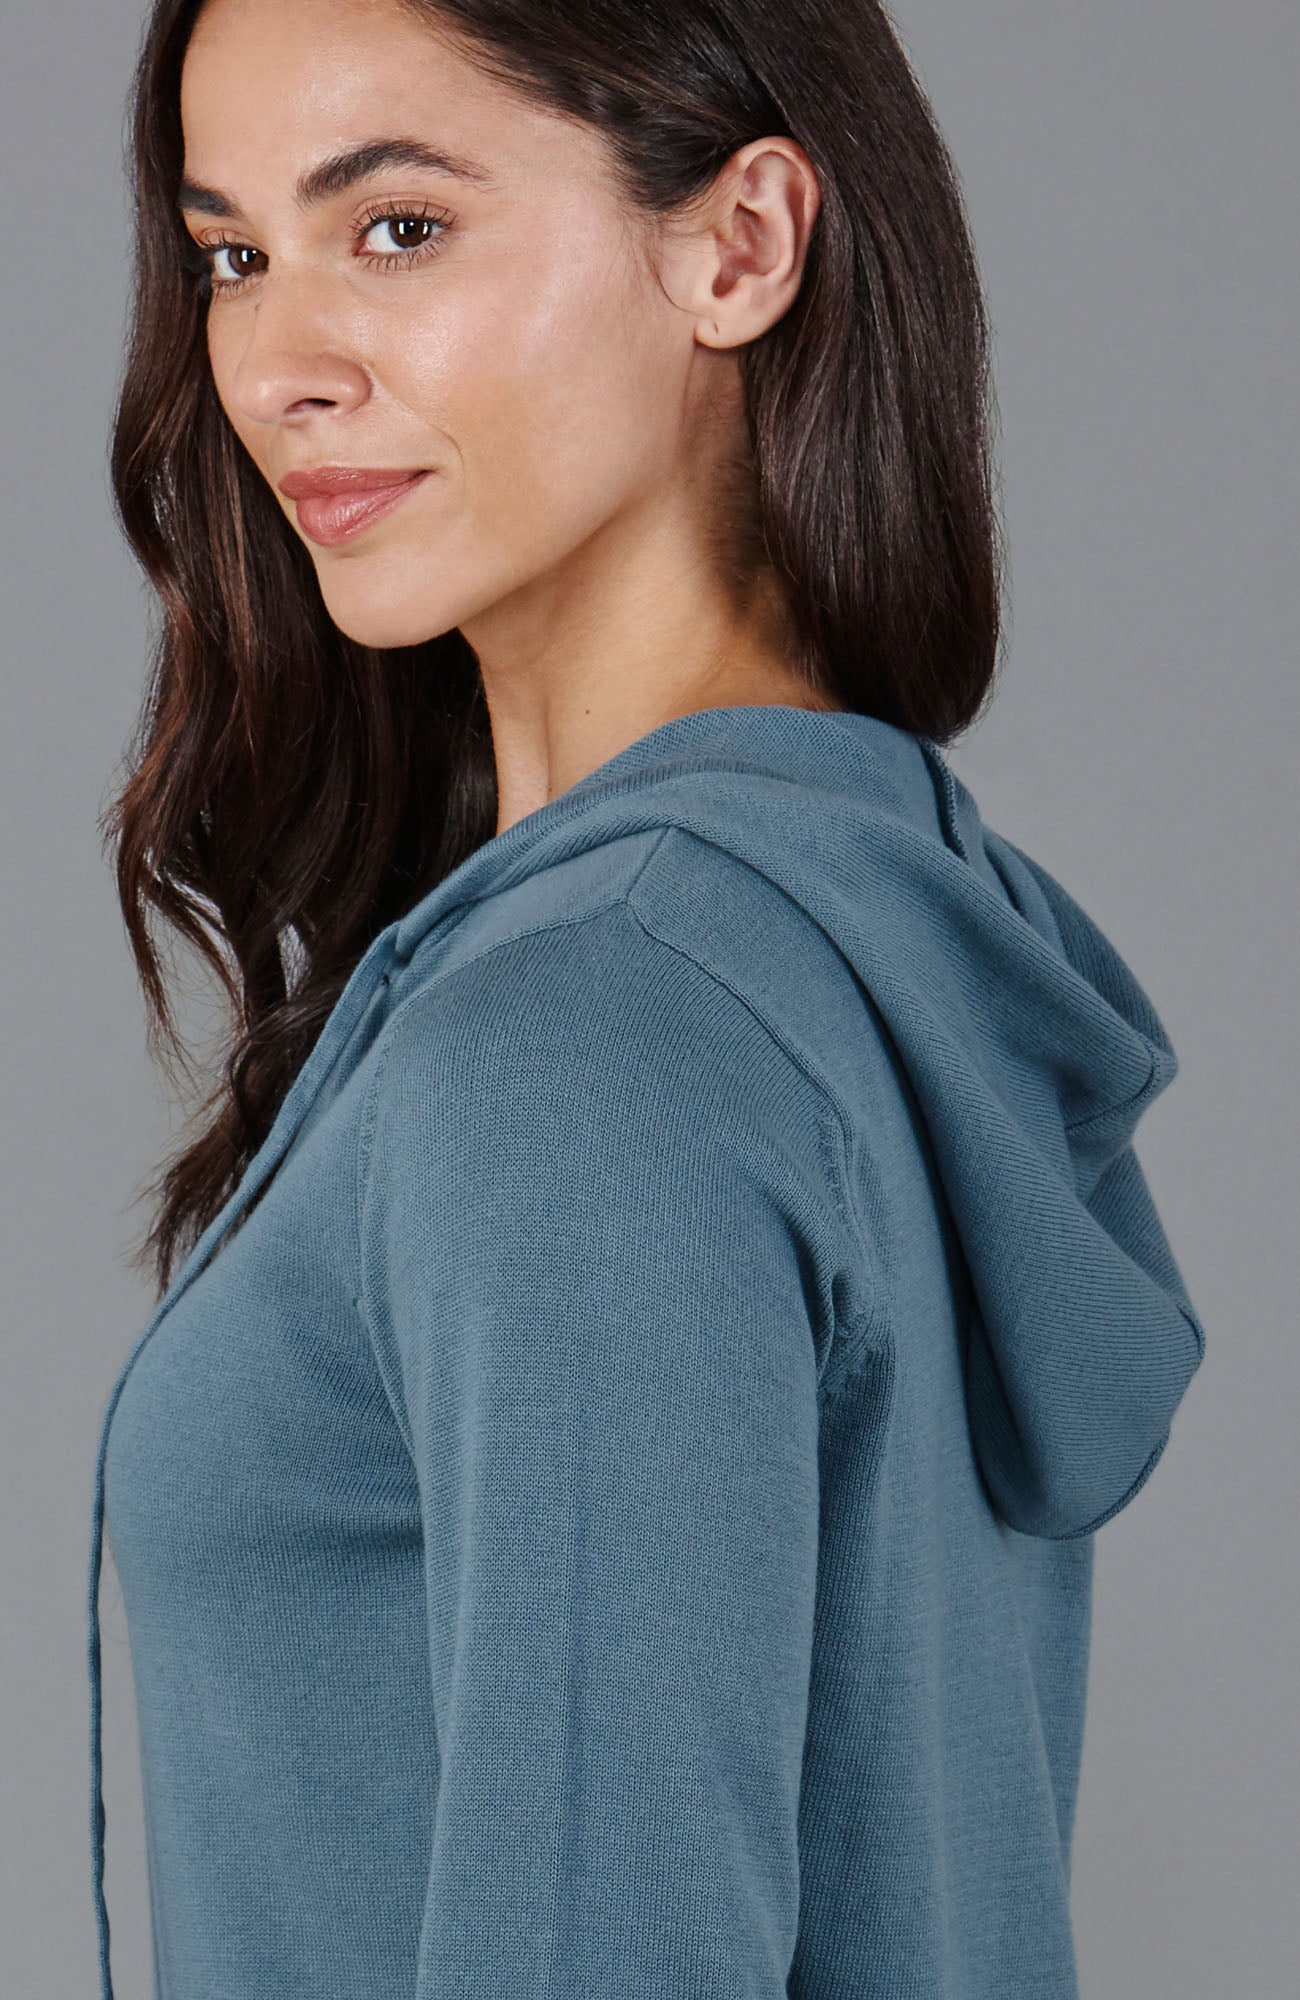 blue womens zip up hooded sweater